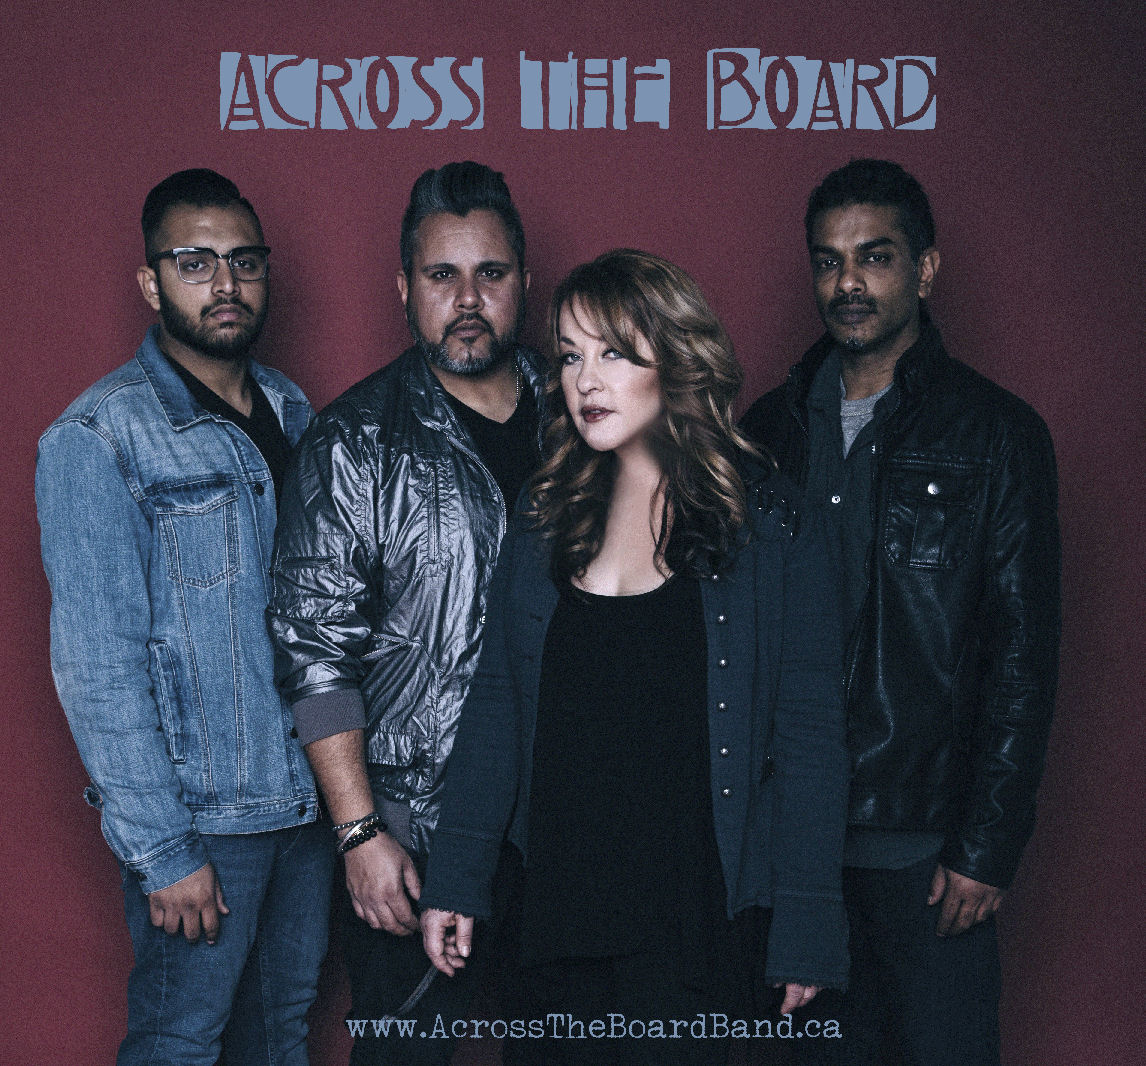  Across The Board – “Don’t Drag Me Down”